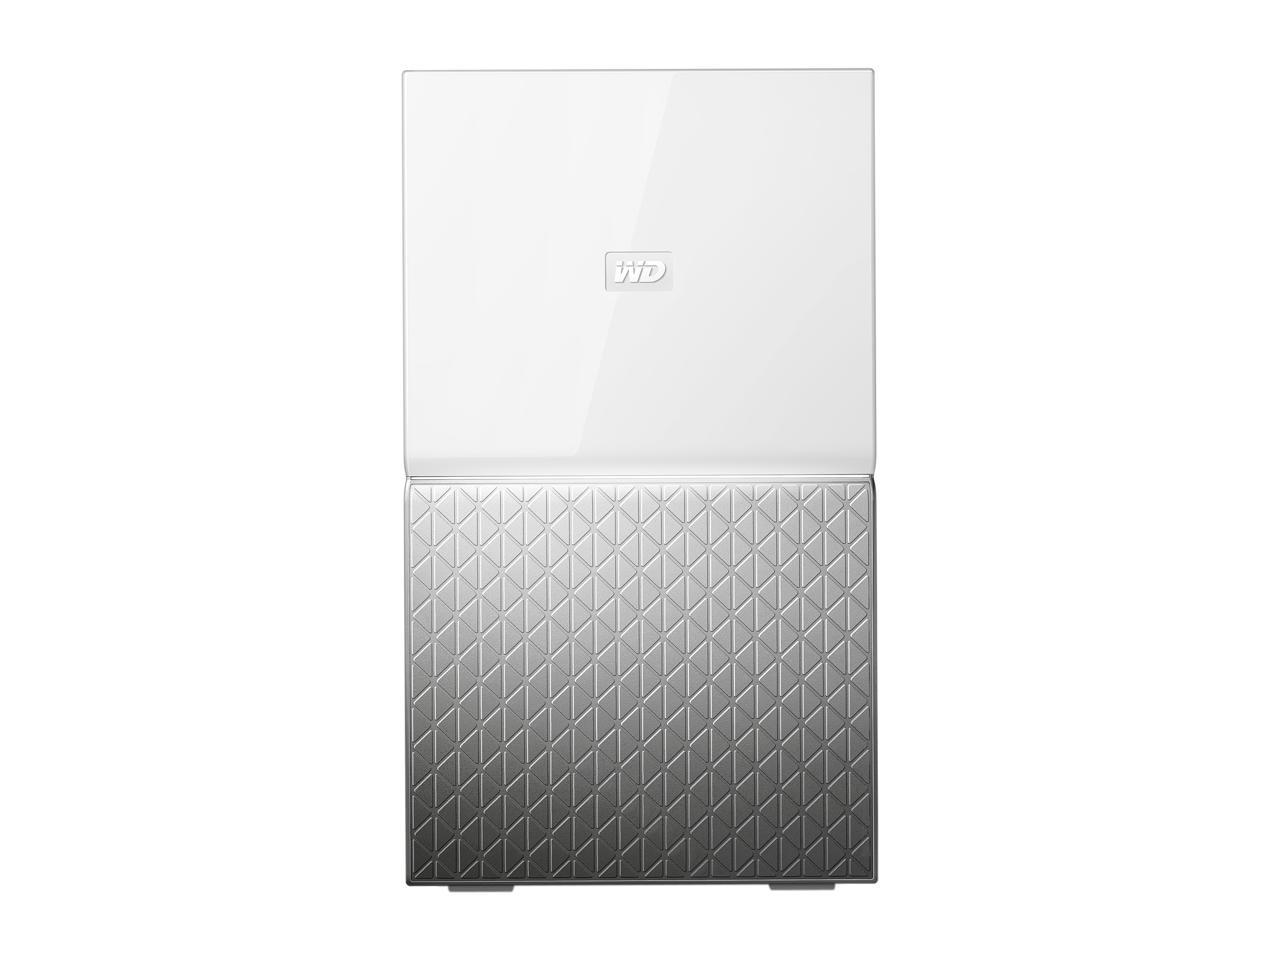 WD 12TB My Cloud Home Duo Personal Cloud Storage (iOS/Android & Mac/PC Compatible) - (WDBMUT0120JWT-NESN)